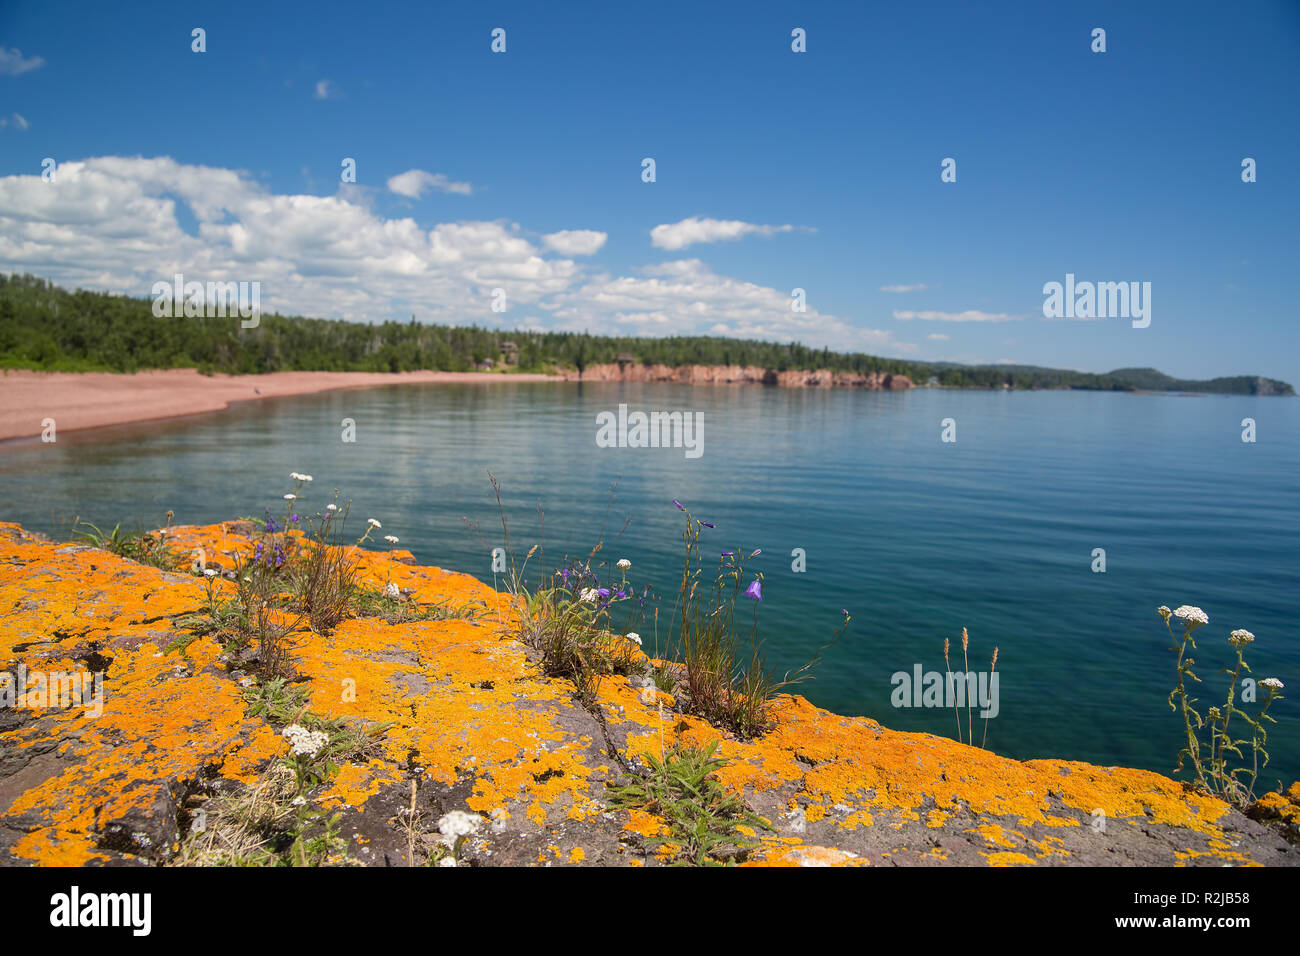 Orange lichens and flowers grown on the basalt rock near the shore of Lake Superior Stock Photo